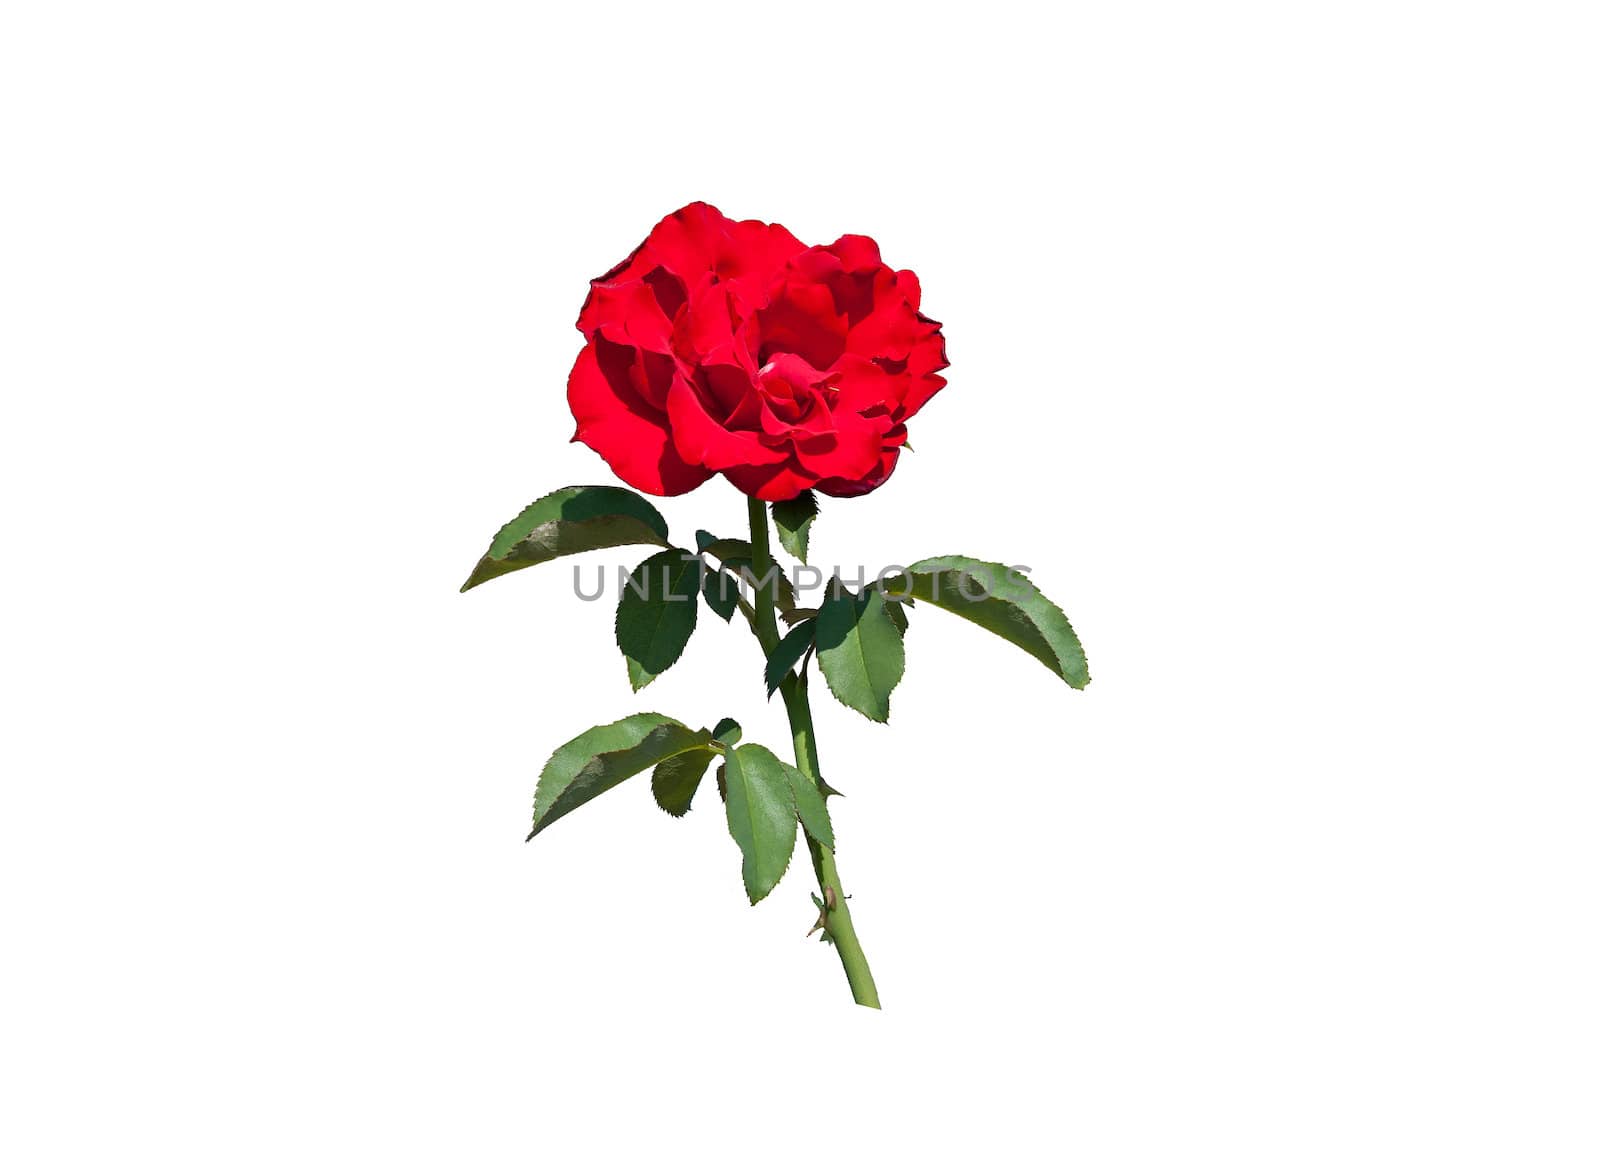 A solitary red rose is isolated on white background.